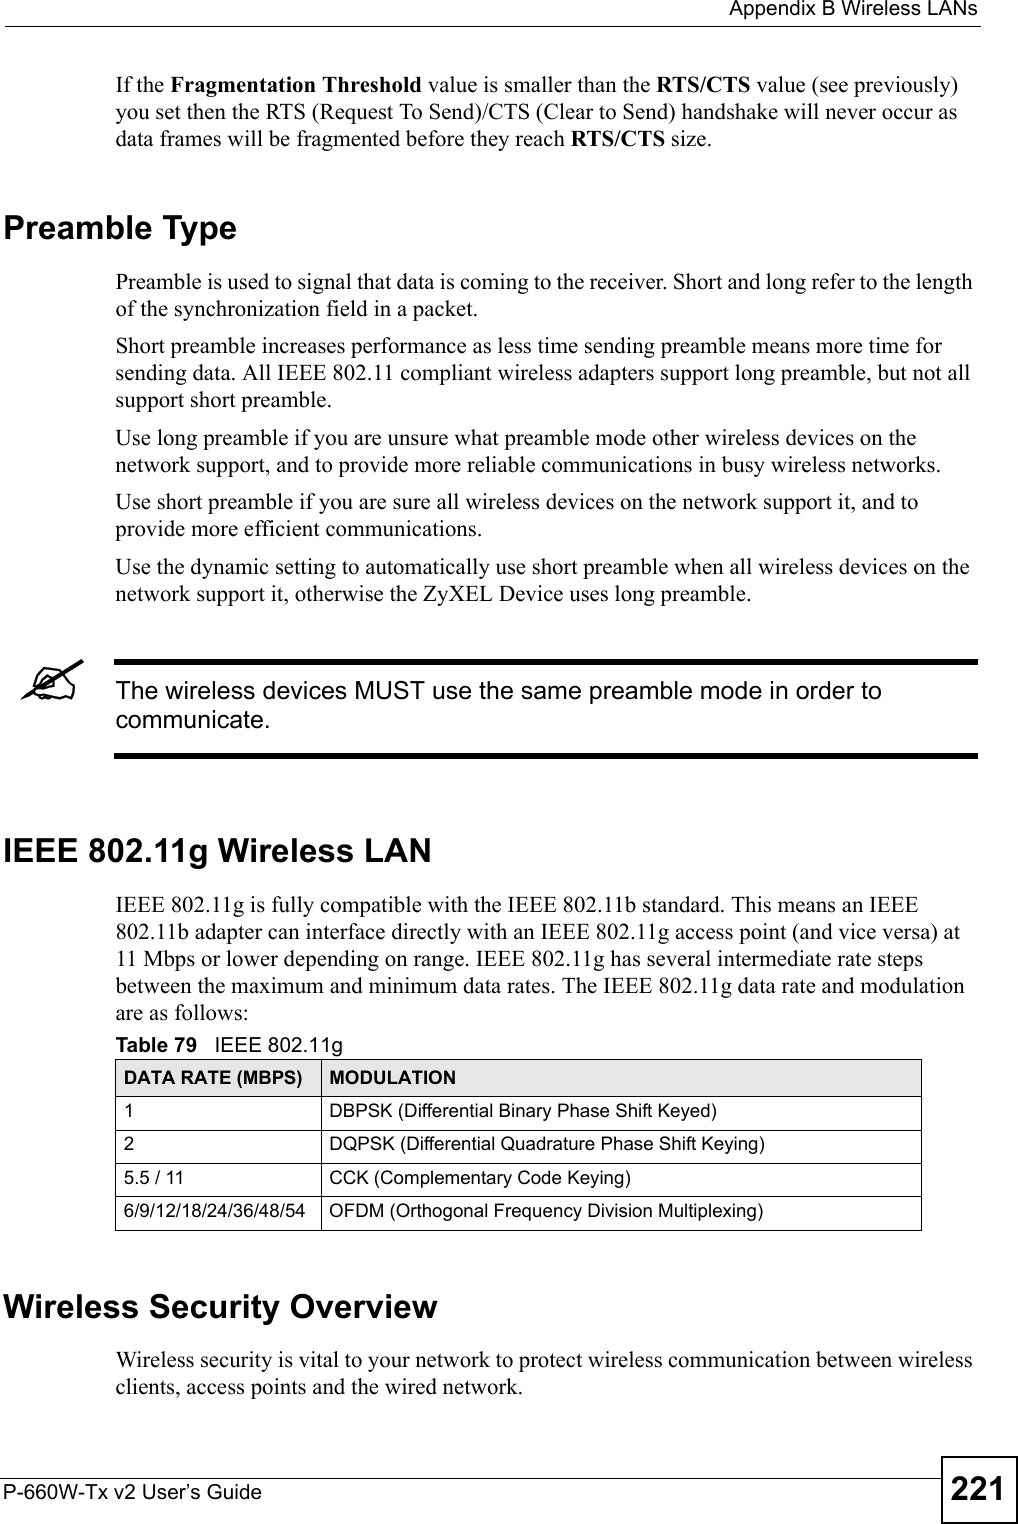  Appendix B Wireless LANsP-660W-Tx v2 User’s Guide 221If the Fragmentation Threshold value is smaller than the RTS/CTS value (see previously) you set then the RTS (Request To Send)/CTS (Clear to Send) handshake will never occur as data frames will be fragmented before they reach RTS/CTS size.Preamble TypePreamble is used to signal that data is coming to the receiver. Short and long refer to the length of the synchronization field in a packet.Short preamble increases performance as less time sending preamble means more time for sending data. All IEEE 802.11 compliant wireless adapters support long preamble, but not all support short preamble. Use long preamble if you are unsure what preamble mode other wireless devices on the network support, and to provide more reliable communications in busy wireless networks. Use short preamble if you are sure all wireless devices on the network support it, and to provide more efficient communications.Use the dynamic setting to automatically use short preamble when all wireless devices on the network support it, otherwise the ZyXEL Device uses long preamble.&quot;The wireless devices MUST use the same preamble mode in order to communicate.IEEE 802.11g Wireless LANIEEE 802.11g is fully compatible with the IEEE 802.11b standard. This means an IEEE 802.11b adapter can interface directly with an IEEE 802.11g access point (and vice versa) at 11 Mbps or lower depending on range. IEEE 802.11g has several intermediate rate steps between the maximum and minimum data rates. The IEEE 802.11g data rate and modulation are as follows:Wireless Security OverviewWireless security is vital to your network to protect wireless communication between wireless clients, access points and the wired network.Table 79   IEEE 802.11gDATA RATE (MBPS) MODULATION1 DBPSK (Differential Binary Phase Shift Keyed)2 DQPSK (Differential Quadrature Phase Shift Keying)5.5 / 11 CCK (Complementary Code Keying) 6/9/12/18/24/36/48/54 OFDM (Orthogonal Frequency Division Multiplexing) 